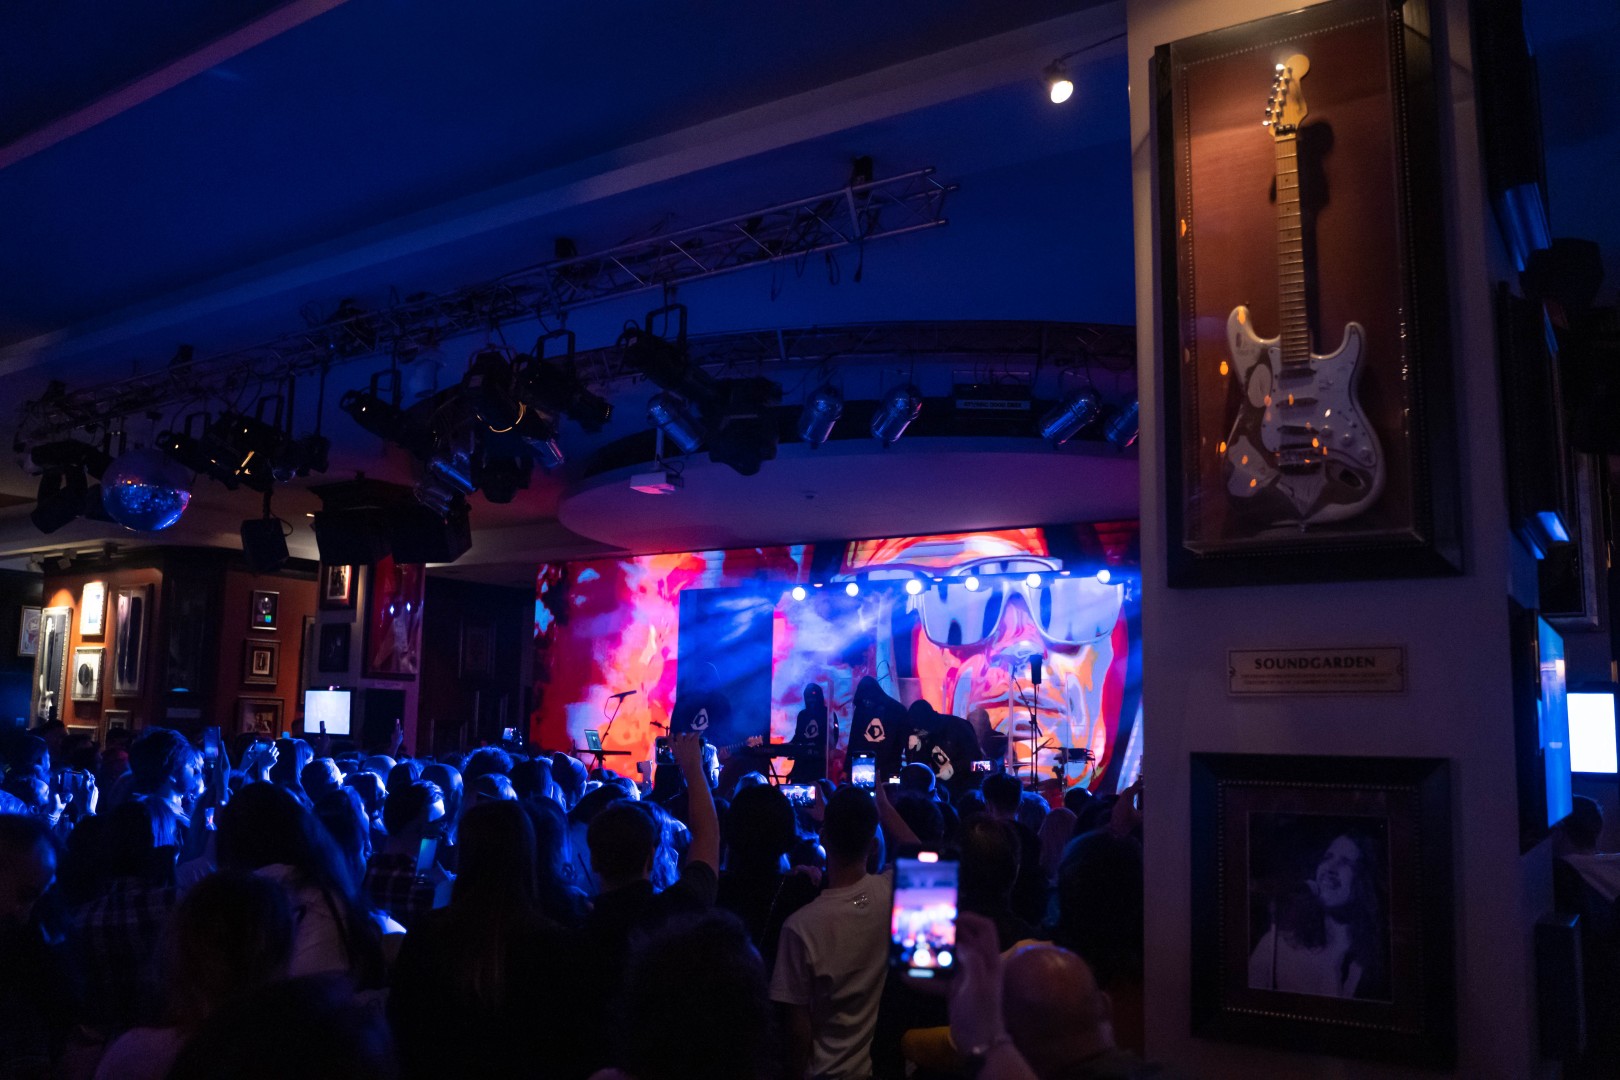 Public at Hard Rock Cafe in Bucharest on January 29, 2023 (2f69a75a81)